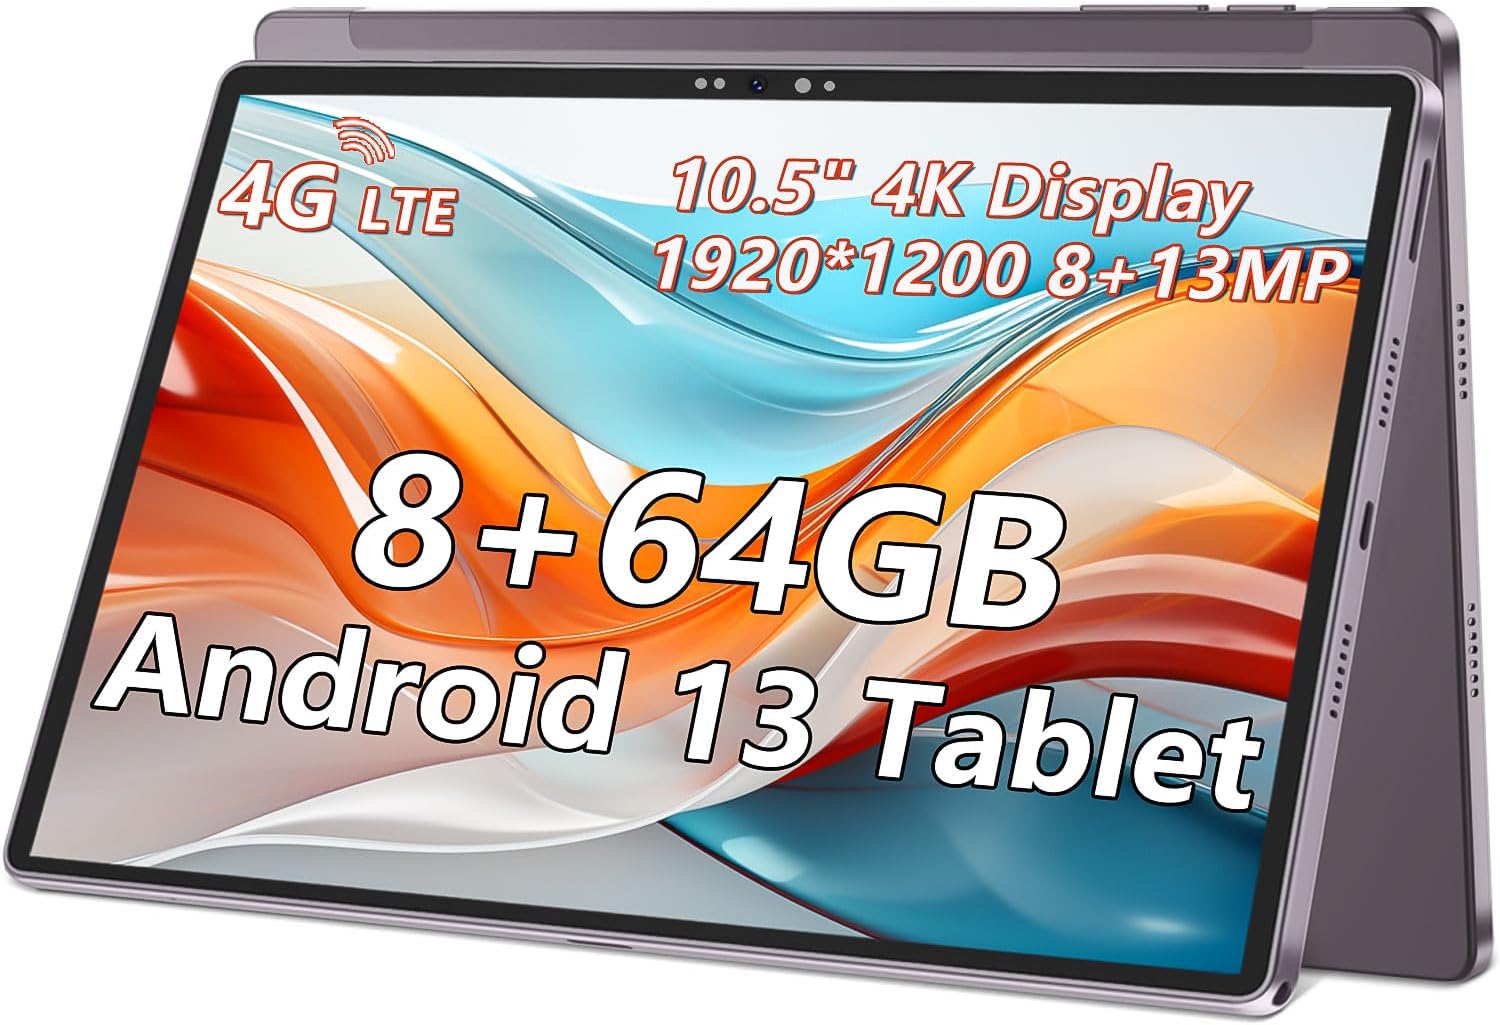 Tablet 10.5 inch Android 13 Tablet 2023 Latest Octa-Core Processor with 8GB RAM 64GB ROM, Dual 13MP+8MP Camera, 4G LTE Cellular with 2.4/5.0GHZ Dual WiFi, Bluetooth, GPS, 1TB Expand, 2K IPS